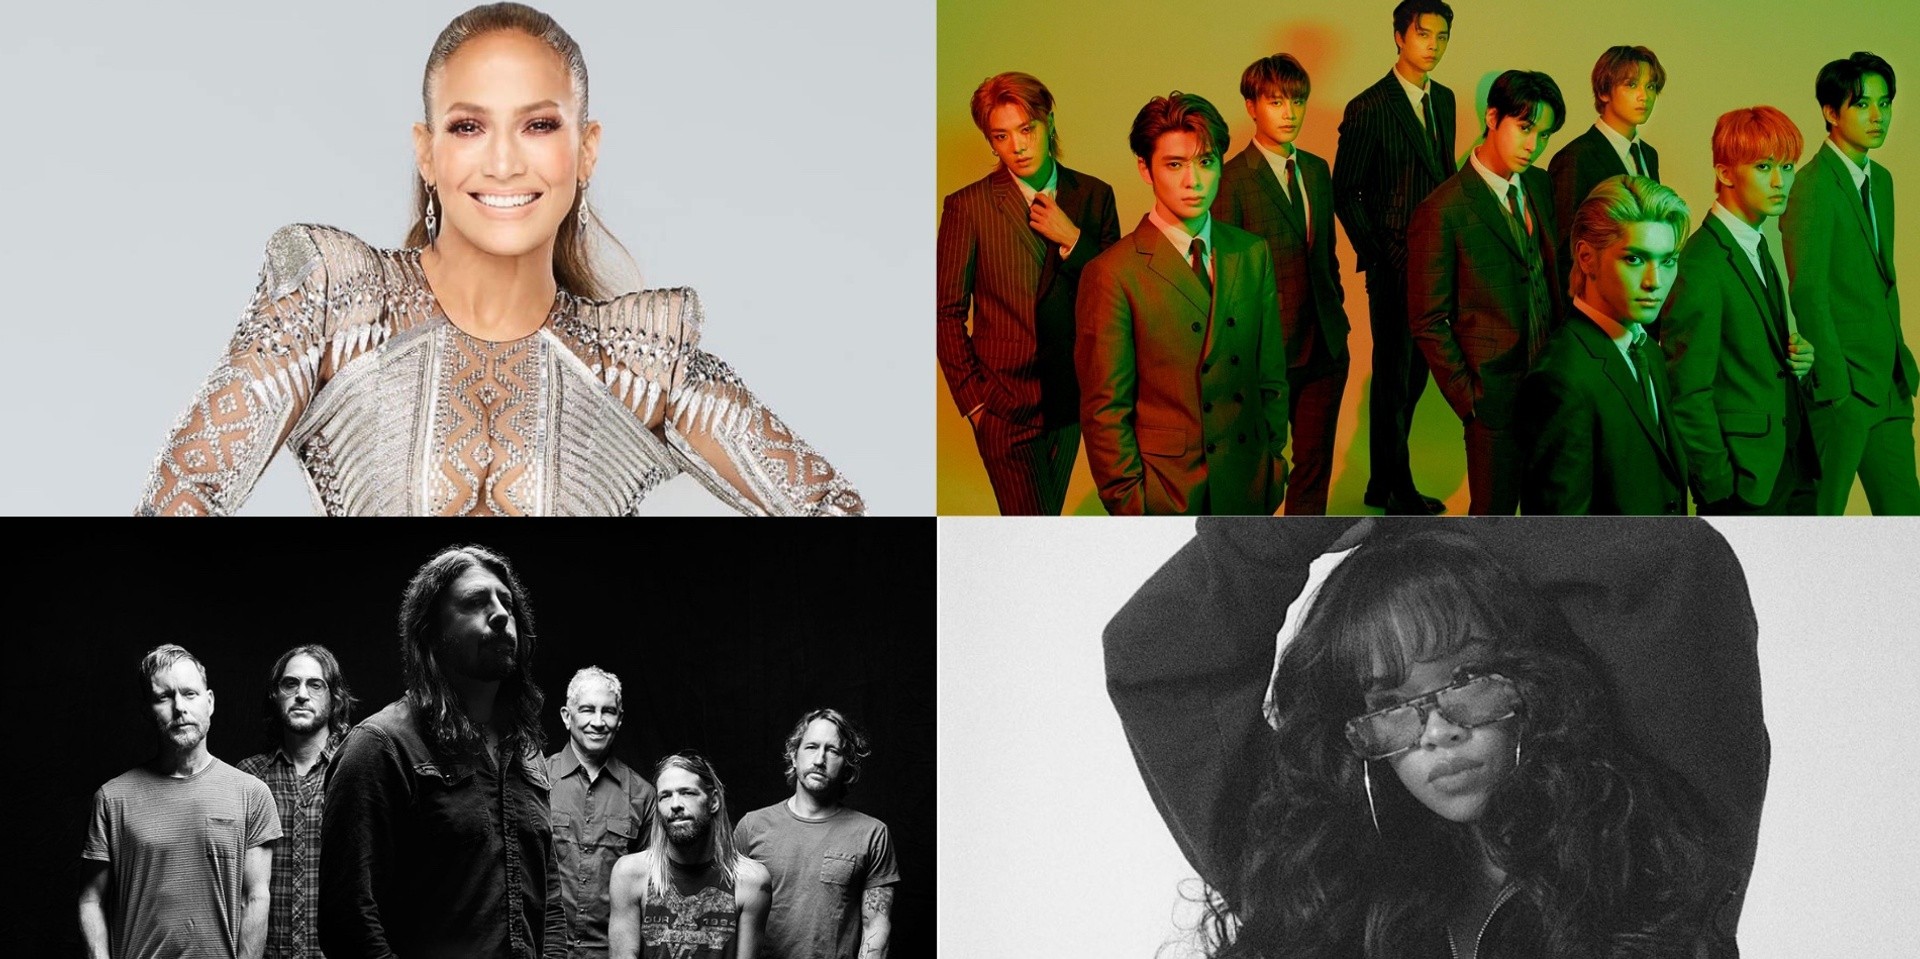 Jennifer Lopez, NCT 127, Foo Fighters, H.E.R., and more to feature in lineup for Global Citizen's 'VAX LIVE' concert